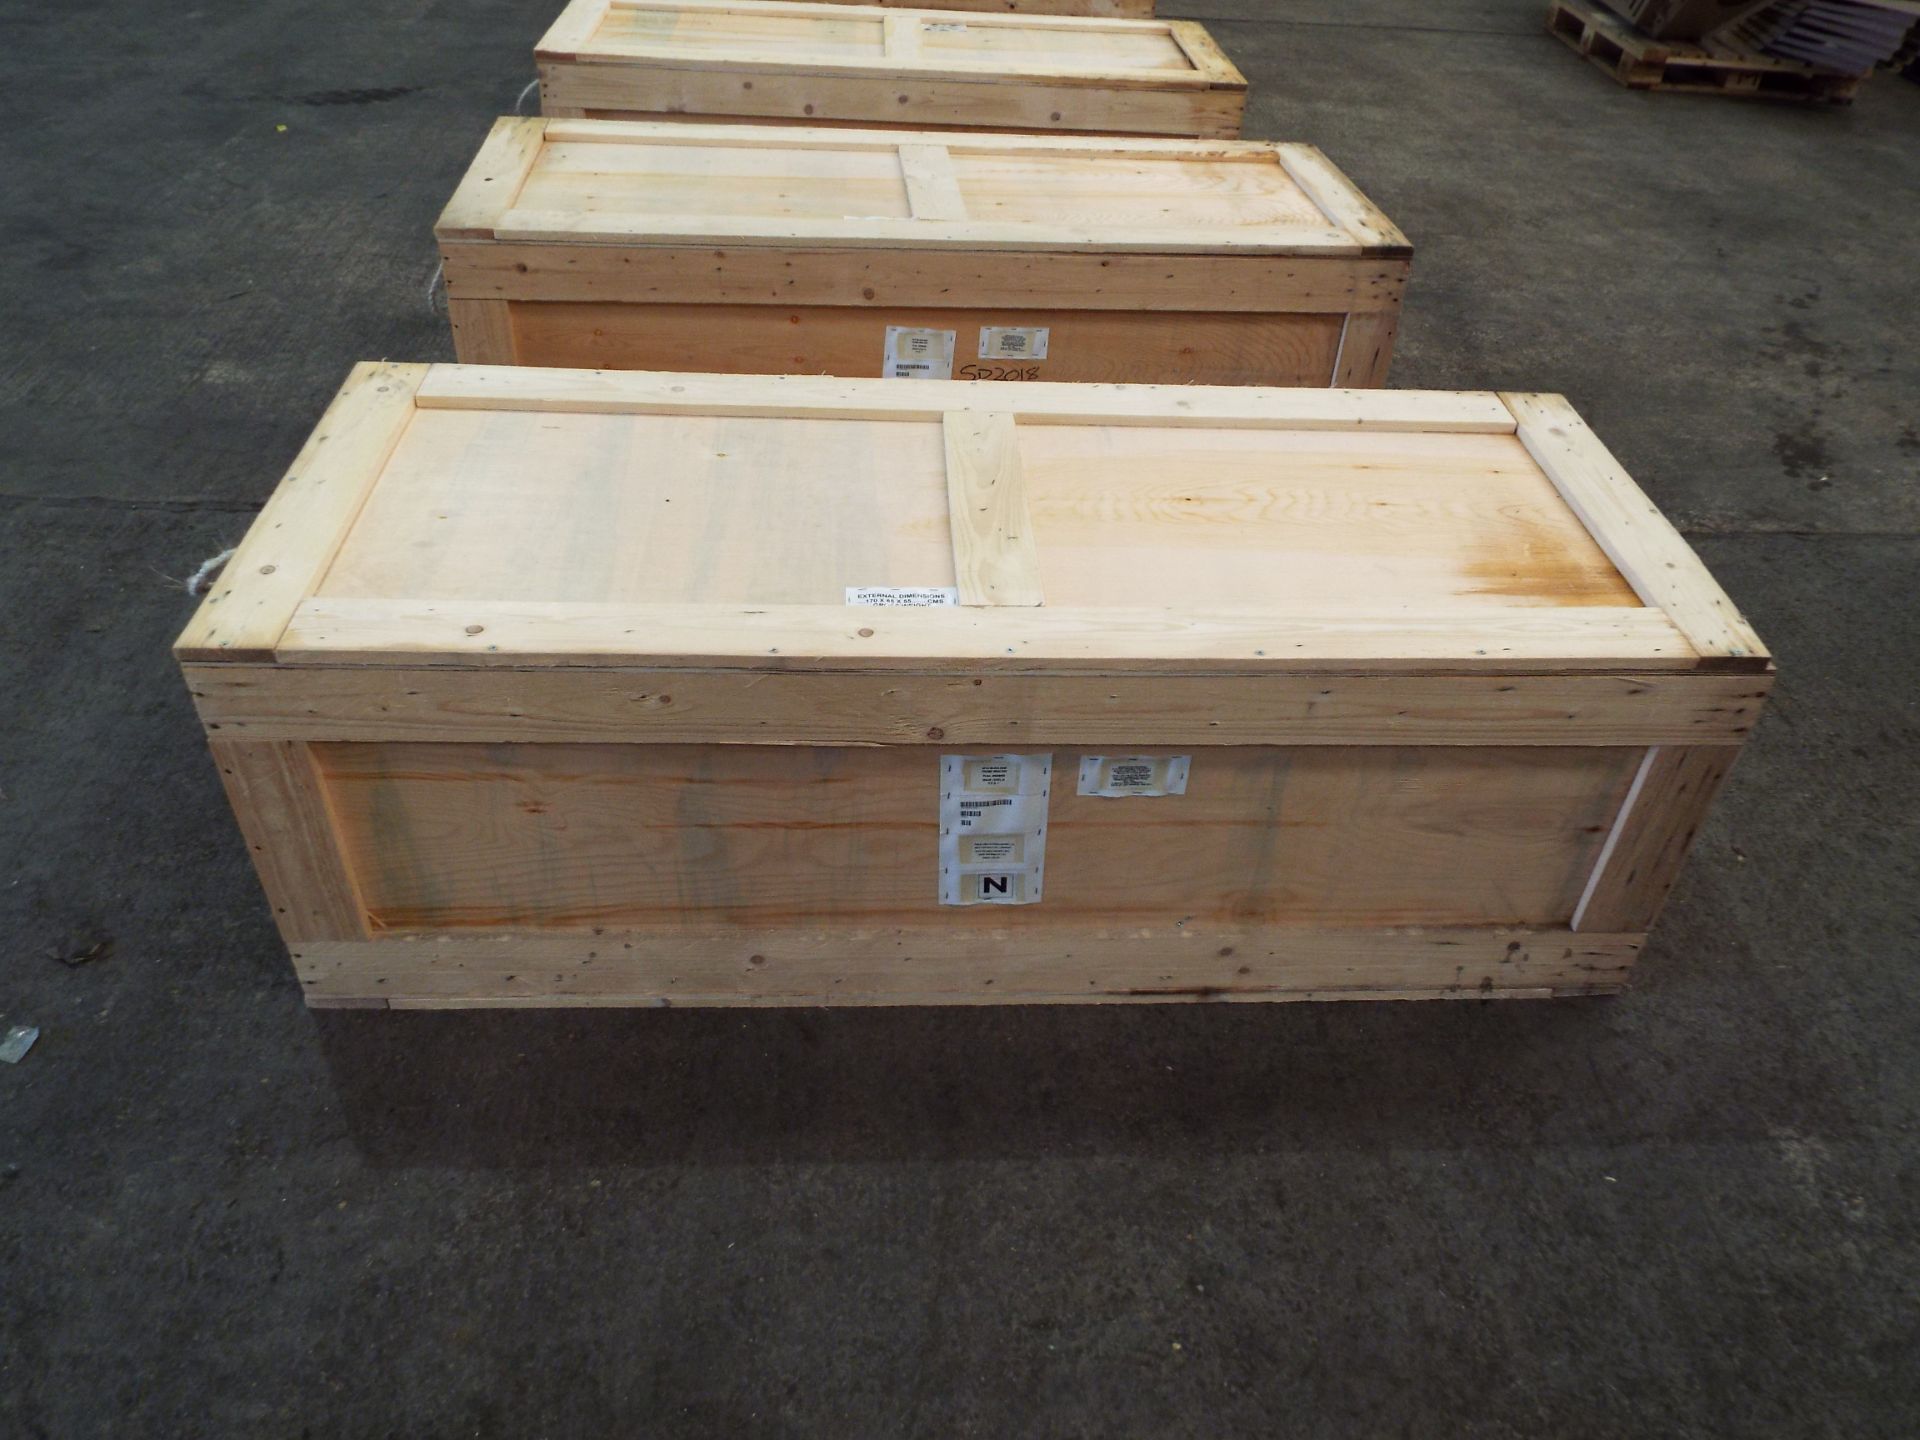 6 x Heavy Duty Packing/Shipping Crates - Image 2 of 6